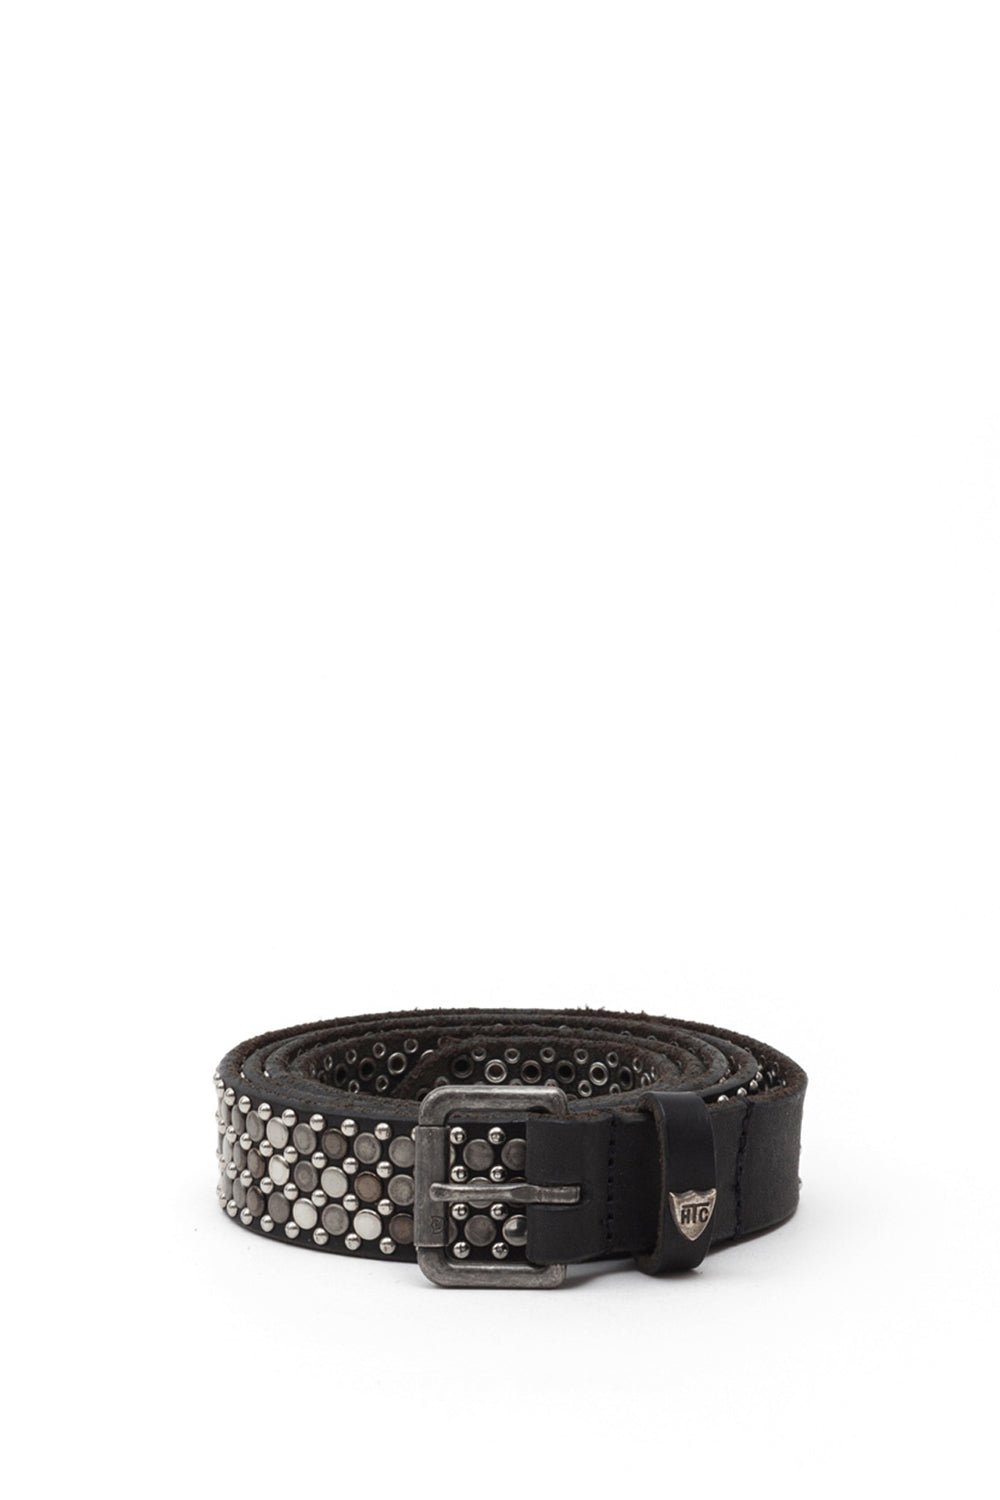 NEST SLIM BELT Black leather belt with studs, metallic buckle, studded zamac belt loop and rivet with HTC logo. Height: 2 cm. Made in Italy. HTC LOS ANGELES